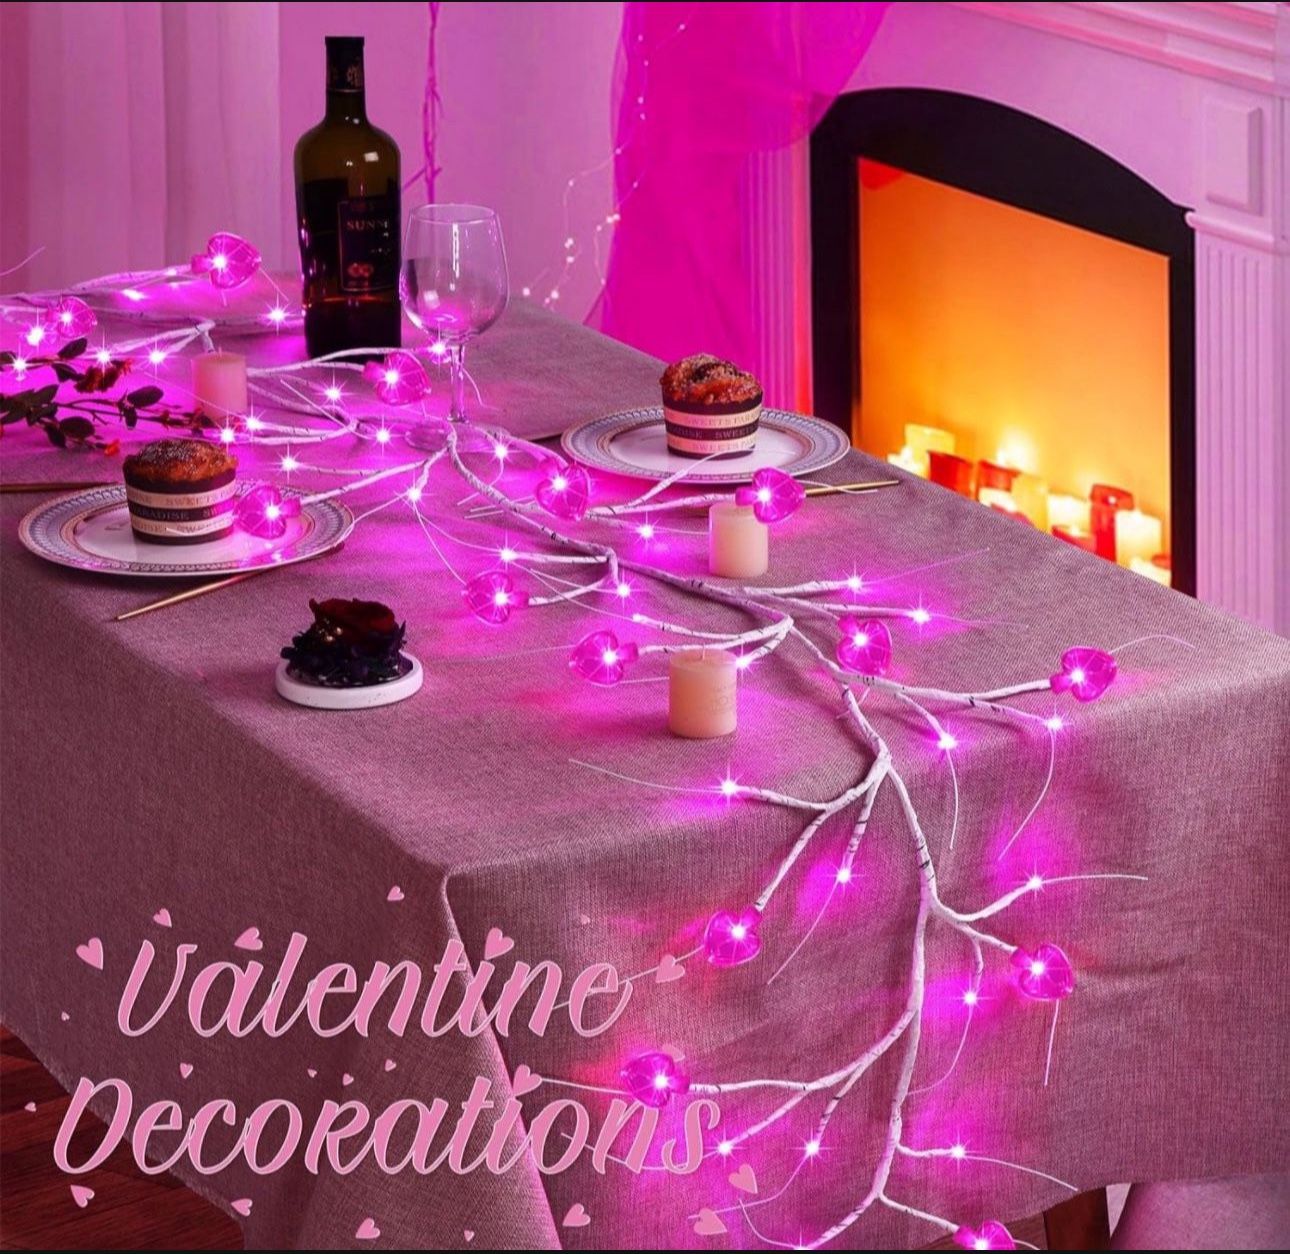 6FT 54LED Valentines Day Decor Garland Valentines Garland with Lights Willow Vine Heart Lights with Timer 8 Modes Battery Operated Waterproof Valentin